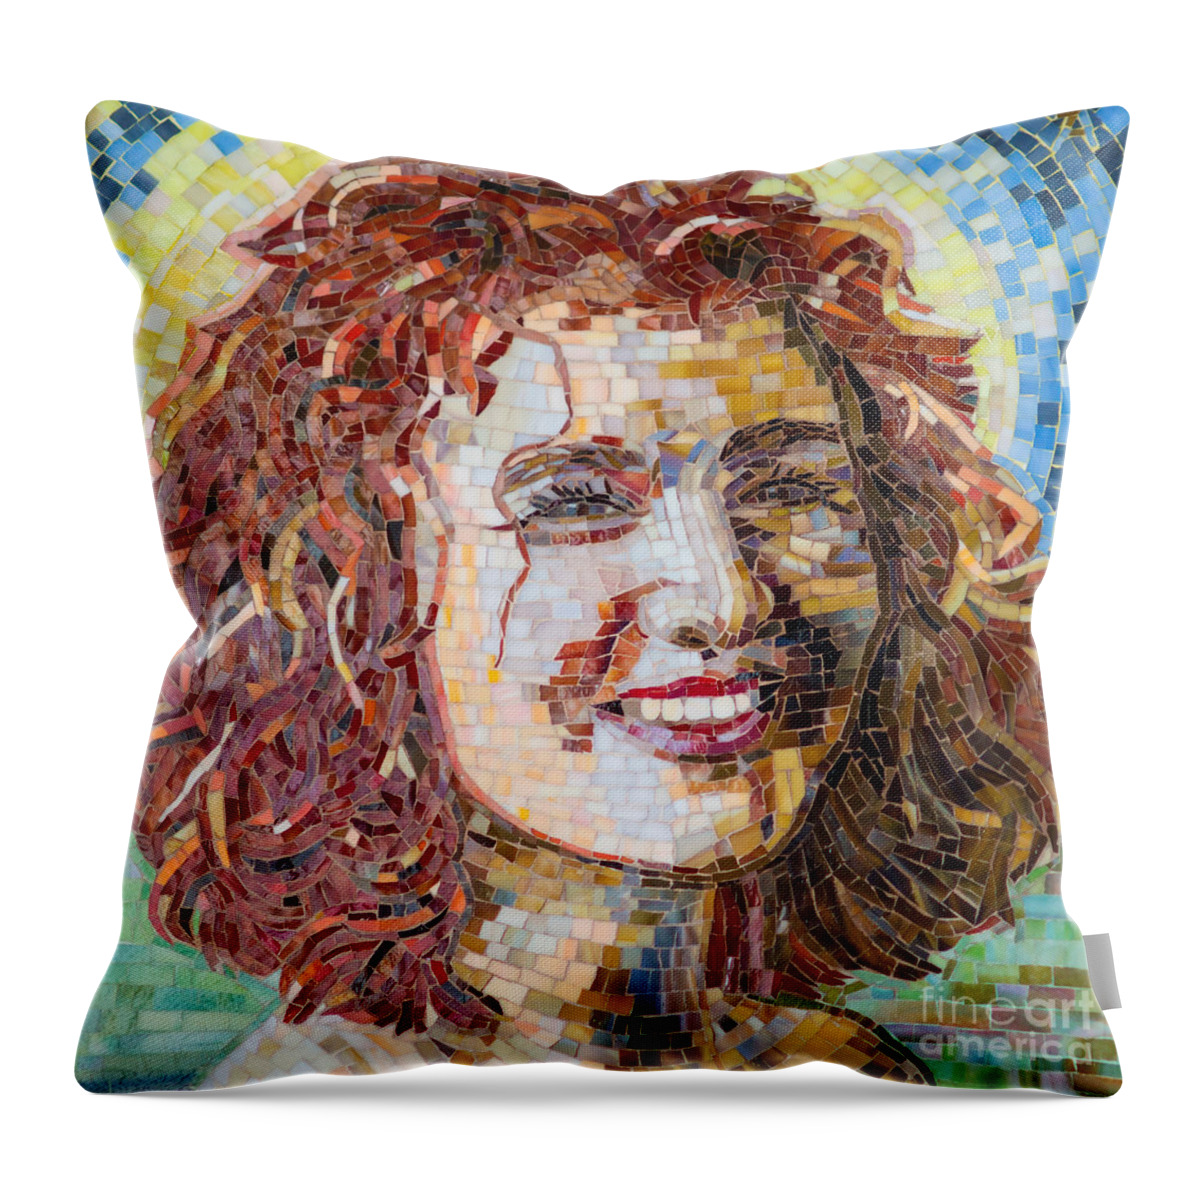 Young Throw Pillow featuring the mixed media Ayala by Adriana Zoon